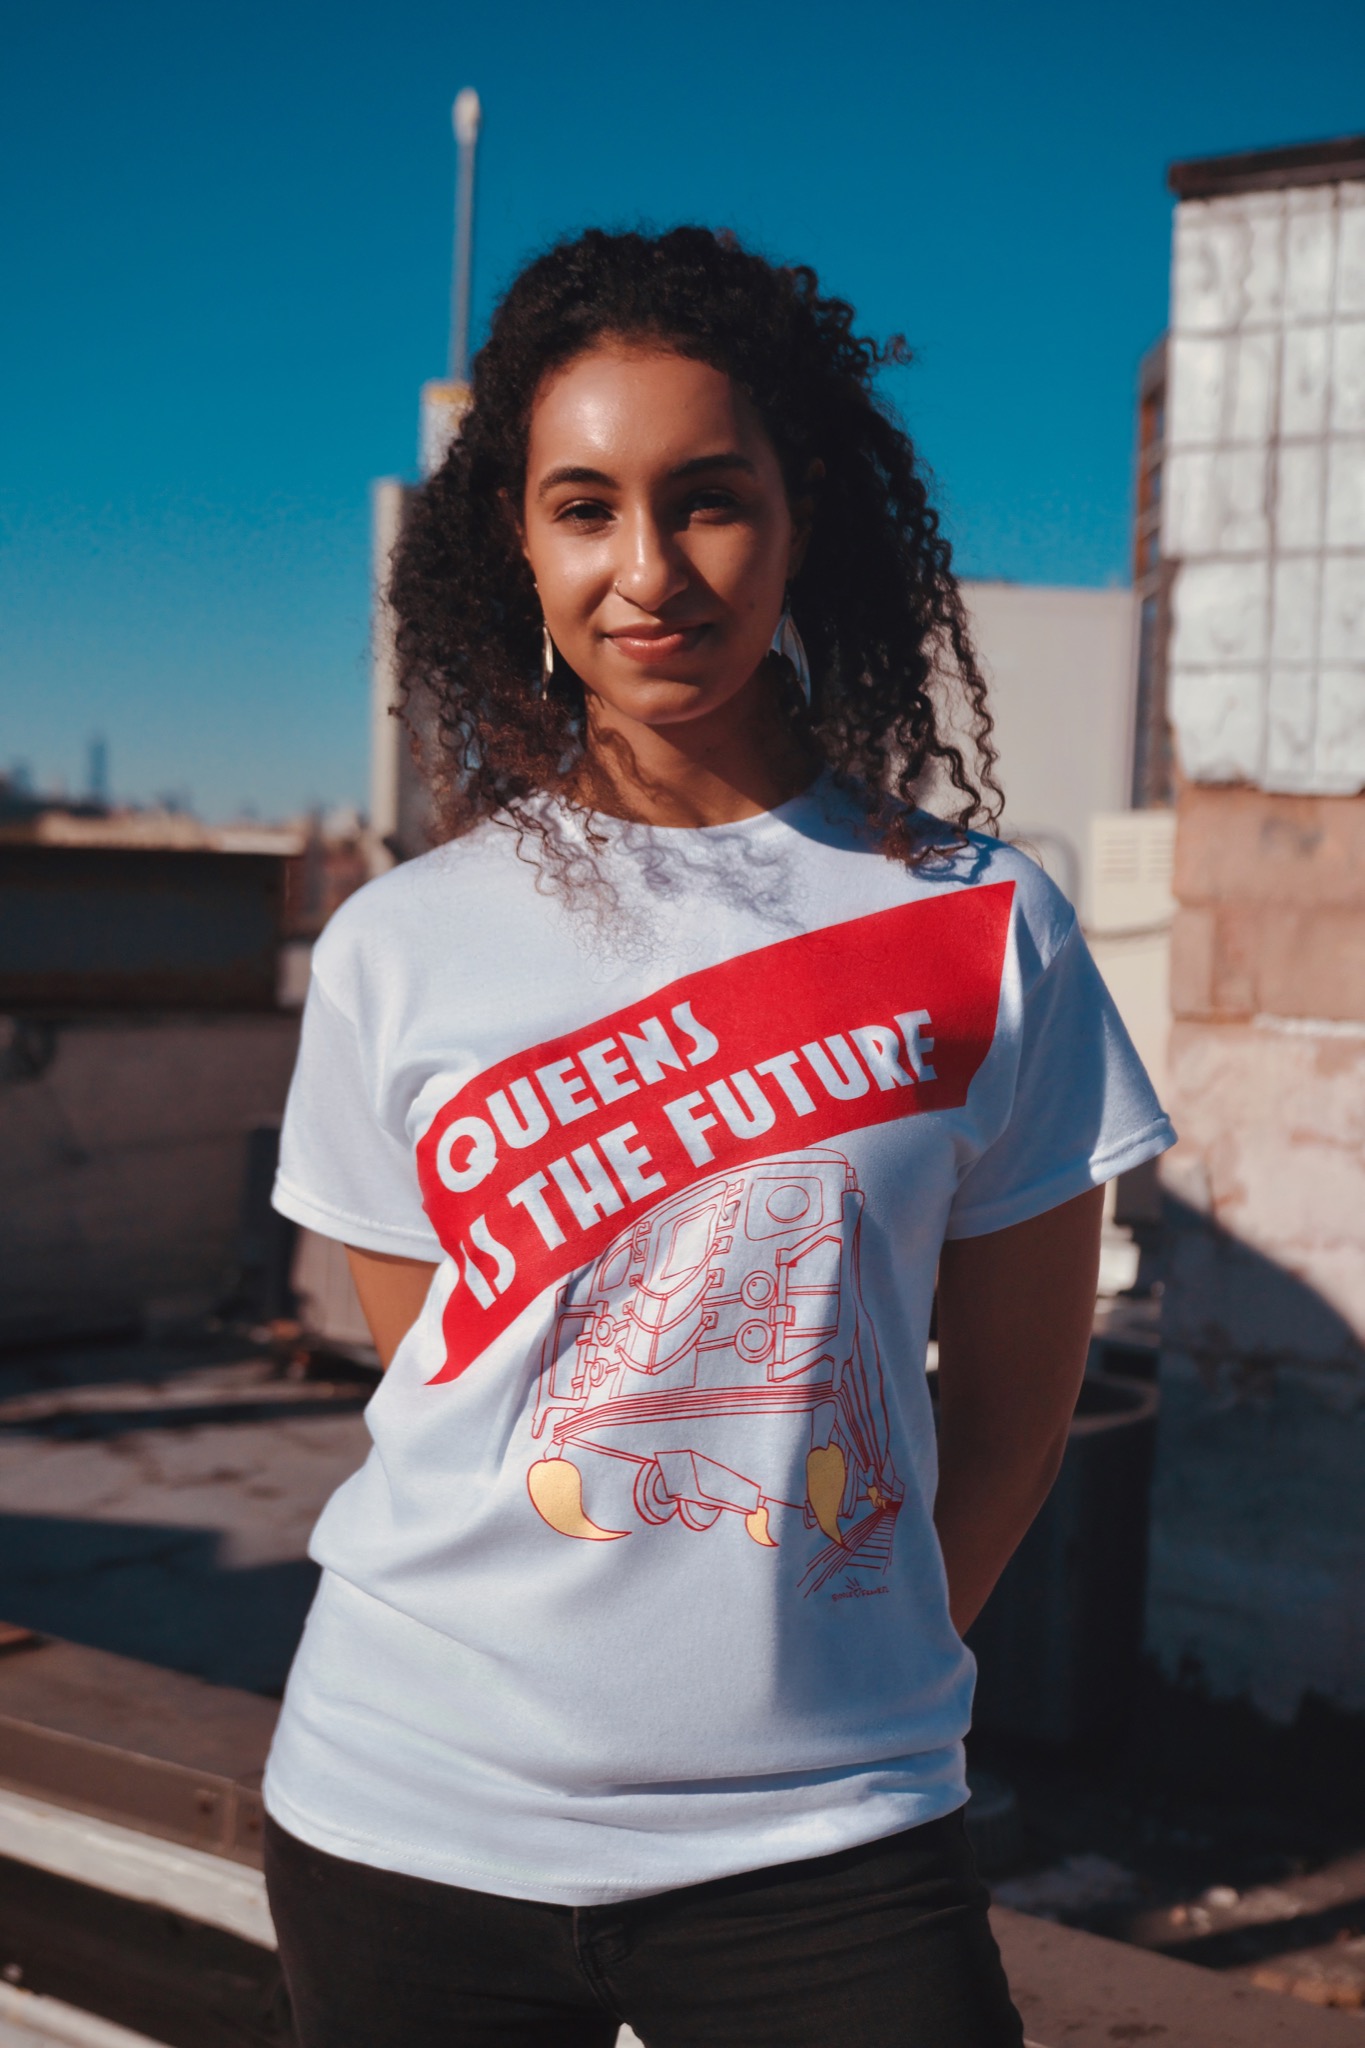 Official Queens Is The Future T-shirt worn by a young woman